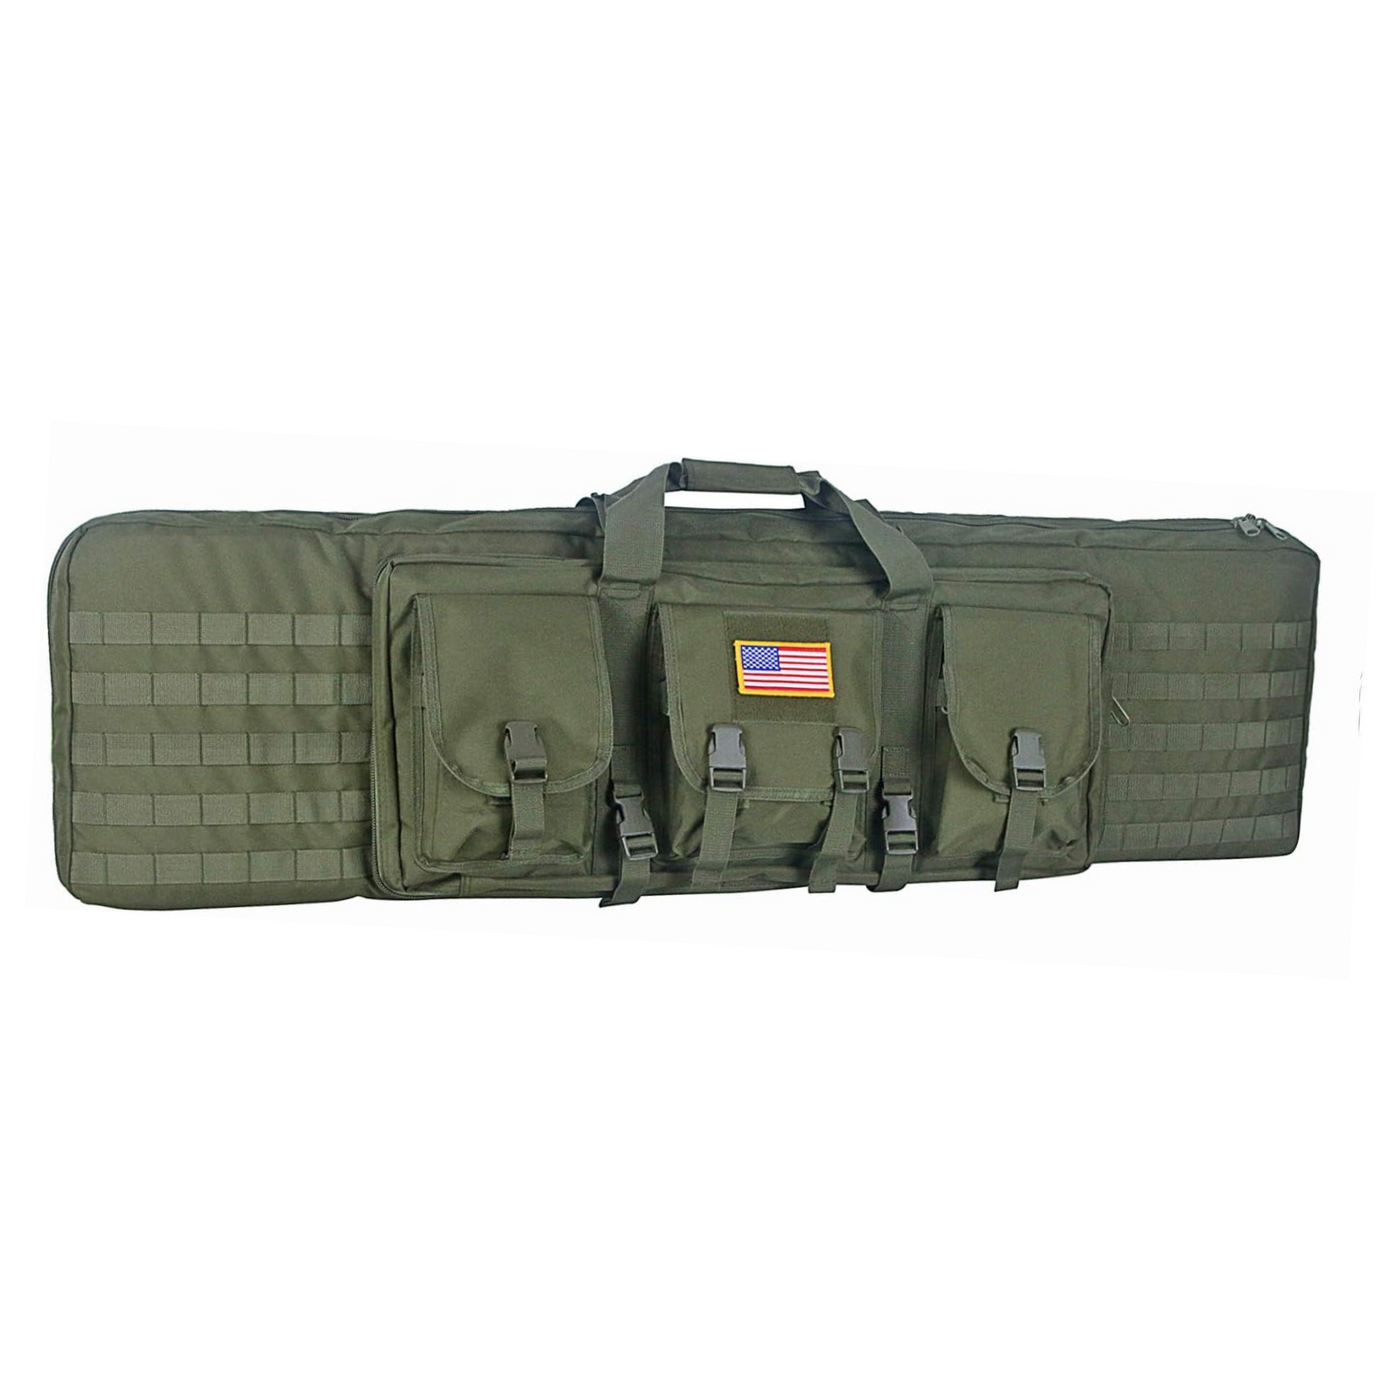 American Classic tactical gun bag with specialized storage for two rifles, 42-inch